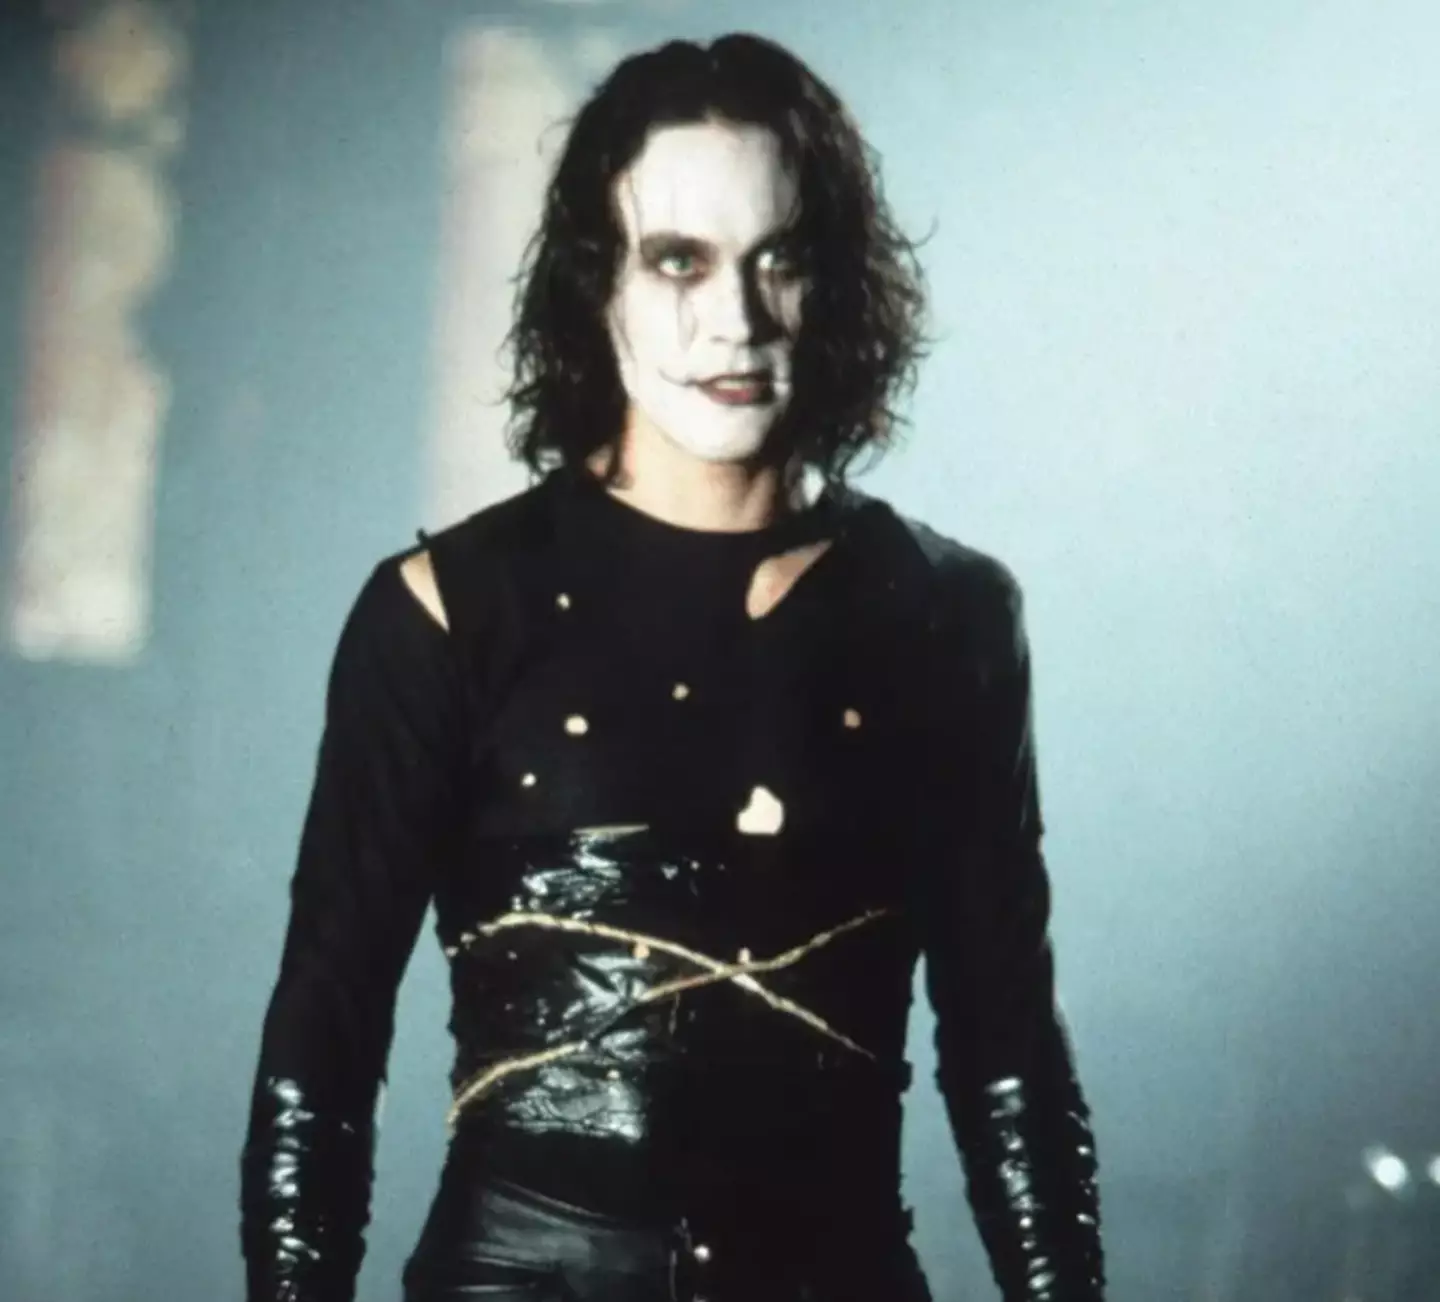 Brandon Lee in The Crow, the movie where a tragic accident killed him at the age of 28.